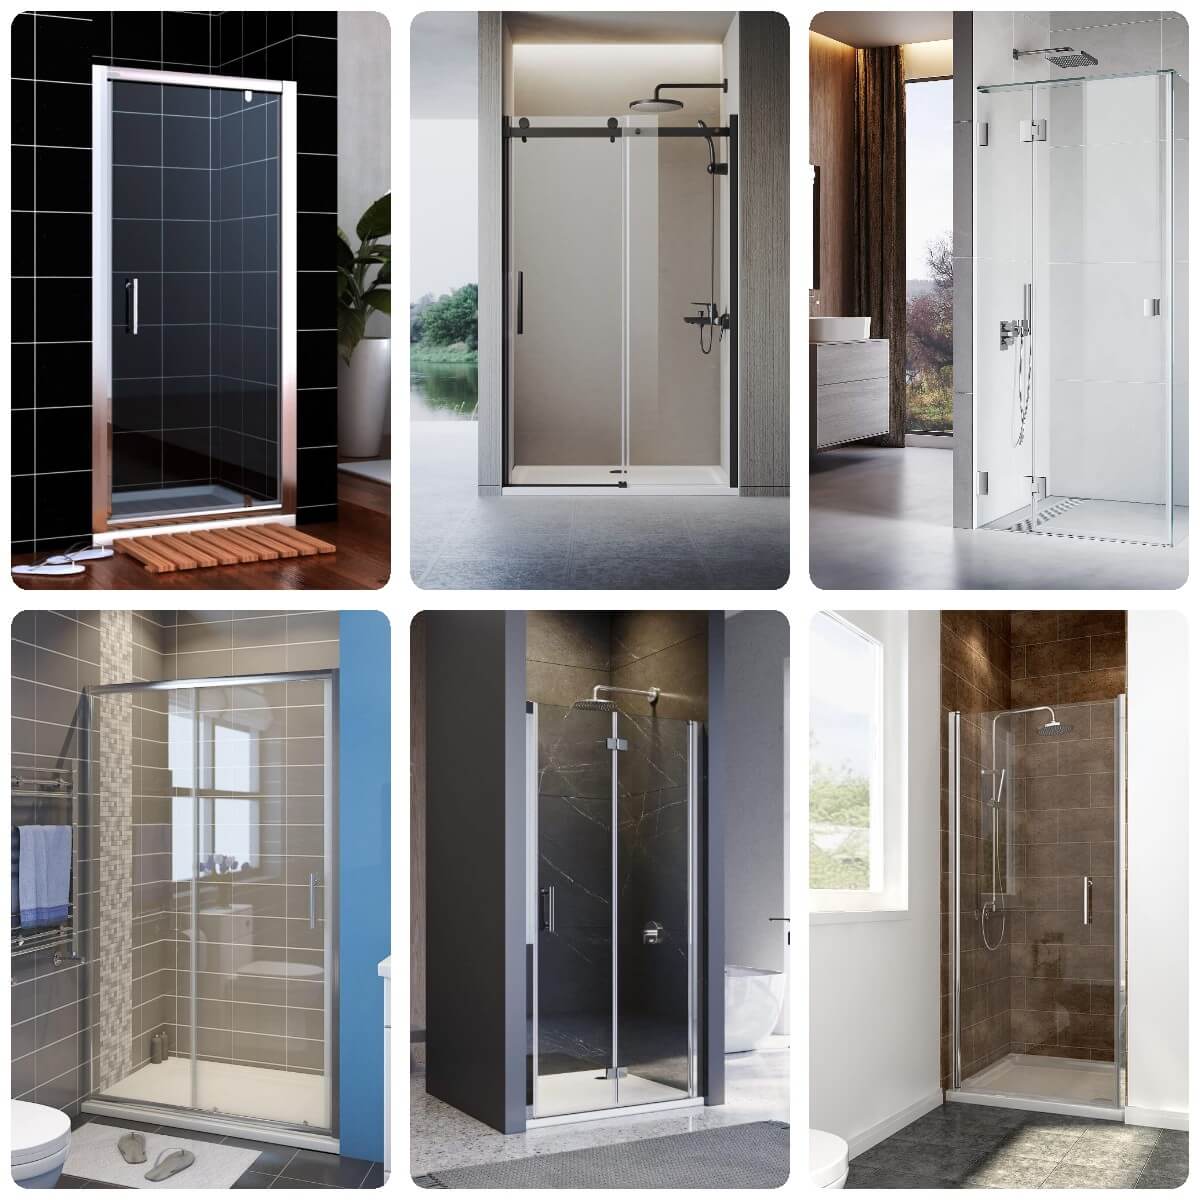 Shower Screen Styles for Every Bathroom Décor: How to Choose What's Right for You?